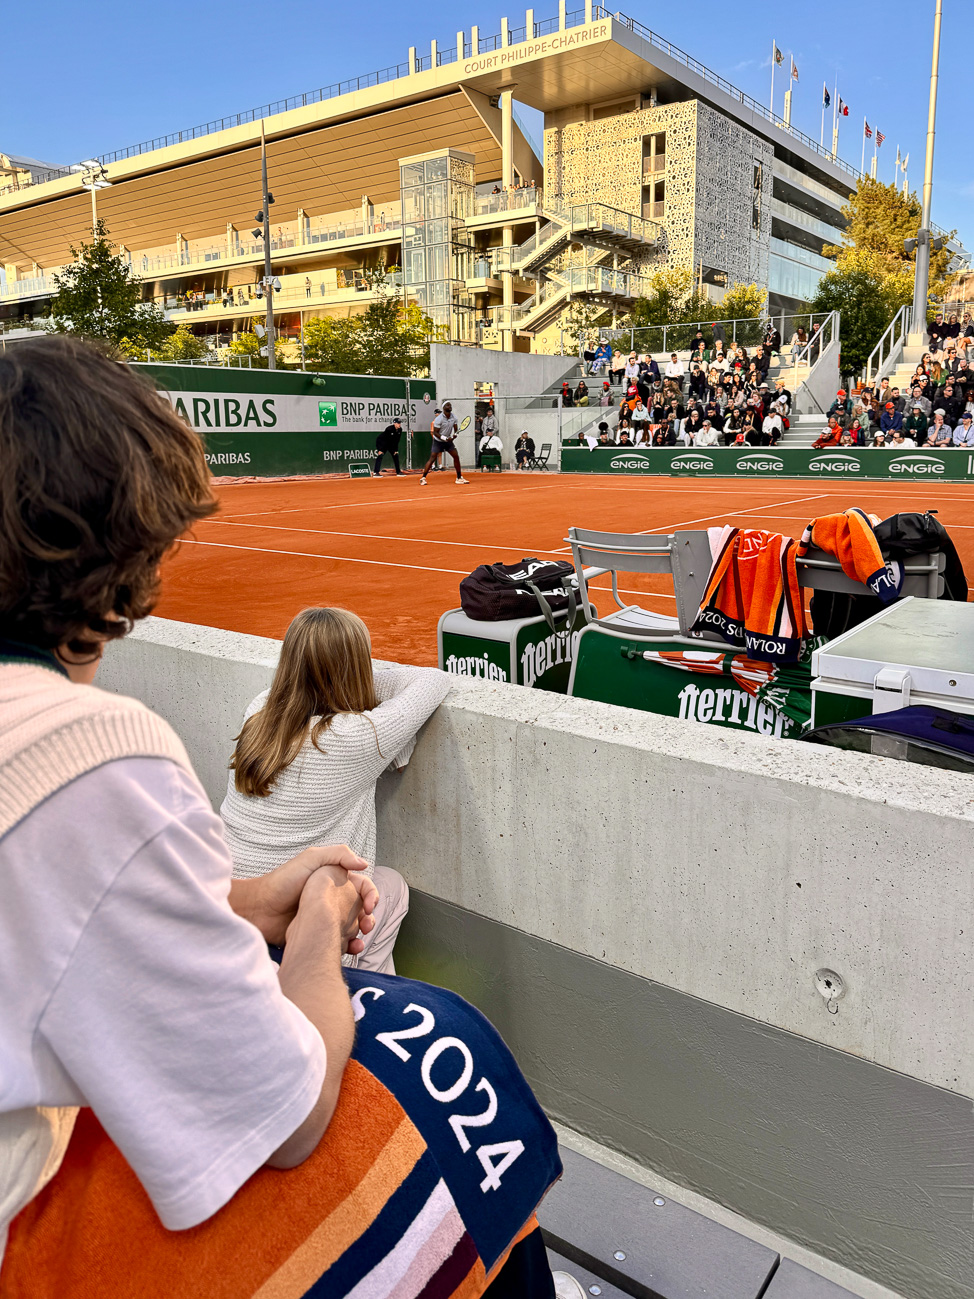 What to Bring to Roland-Garros